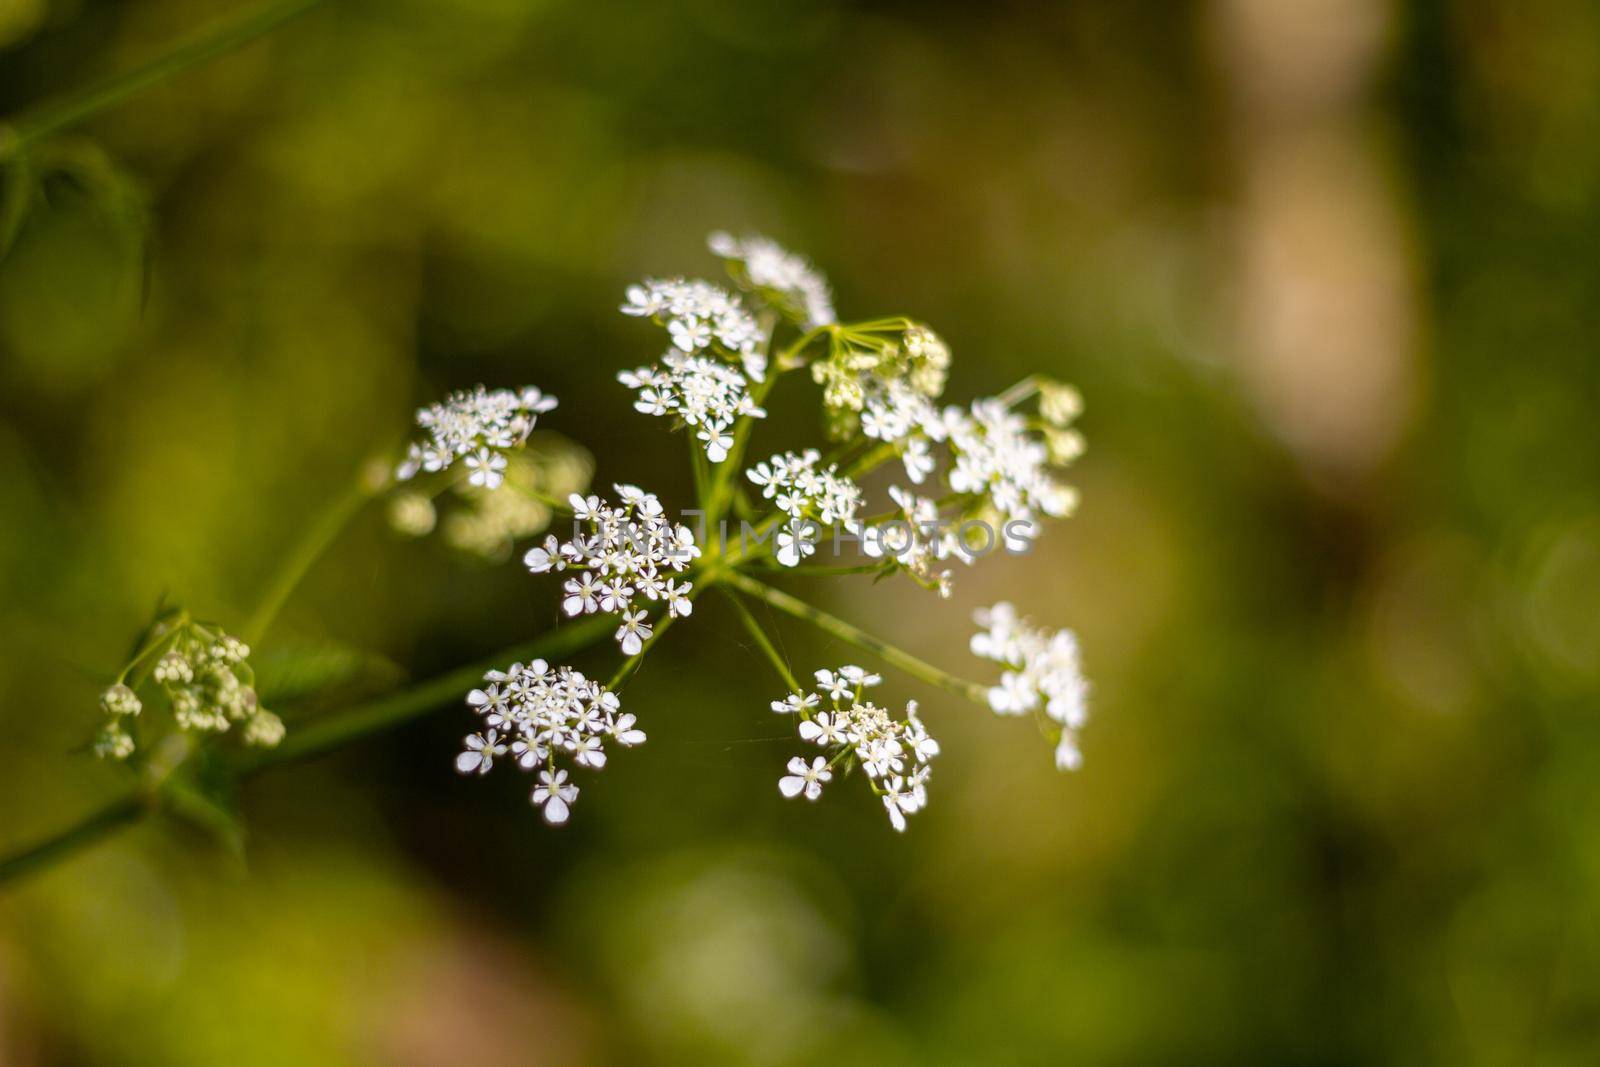 Small White Flowers On A Sunny Day Against A Green Background